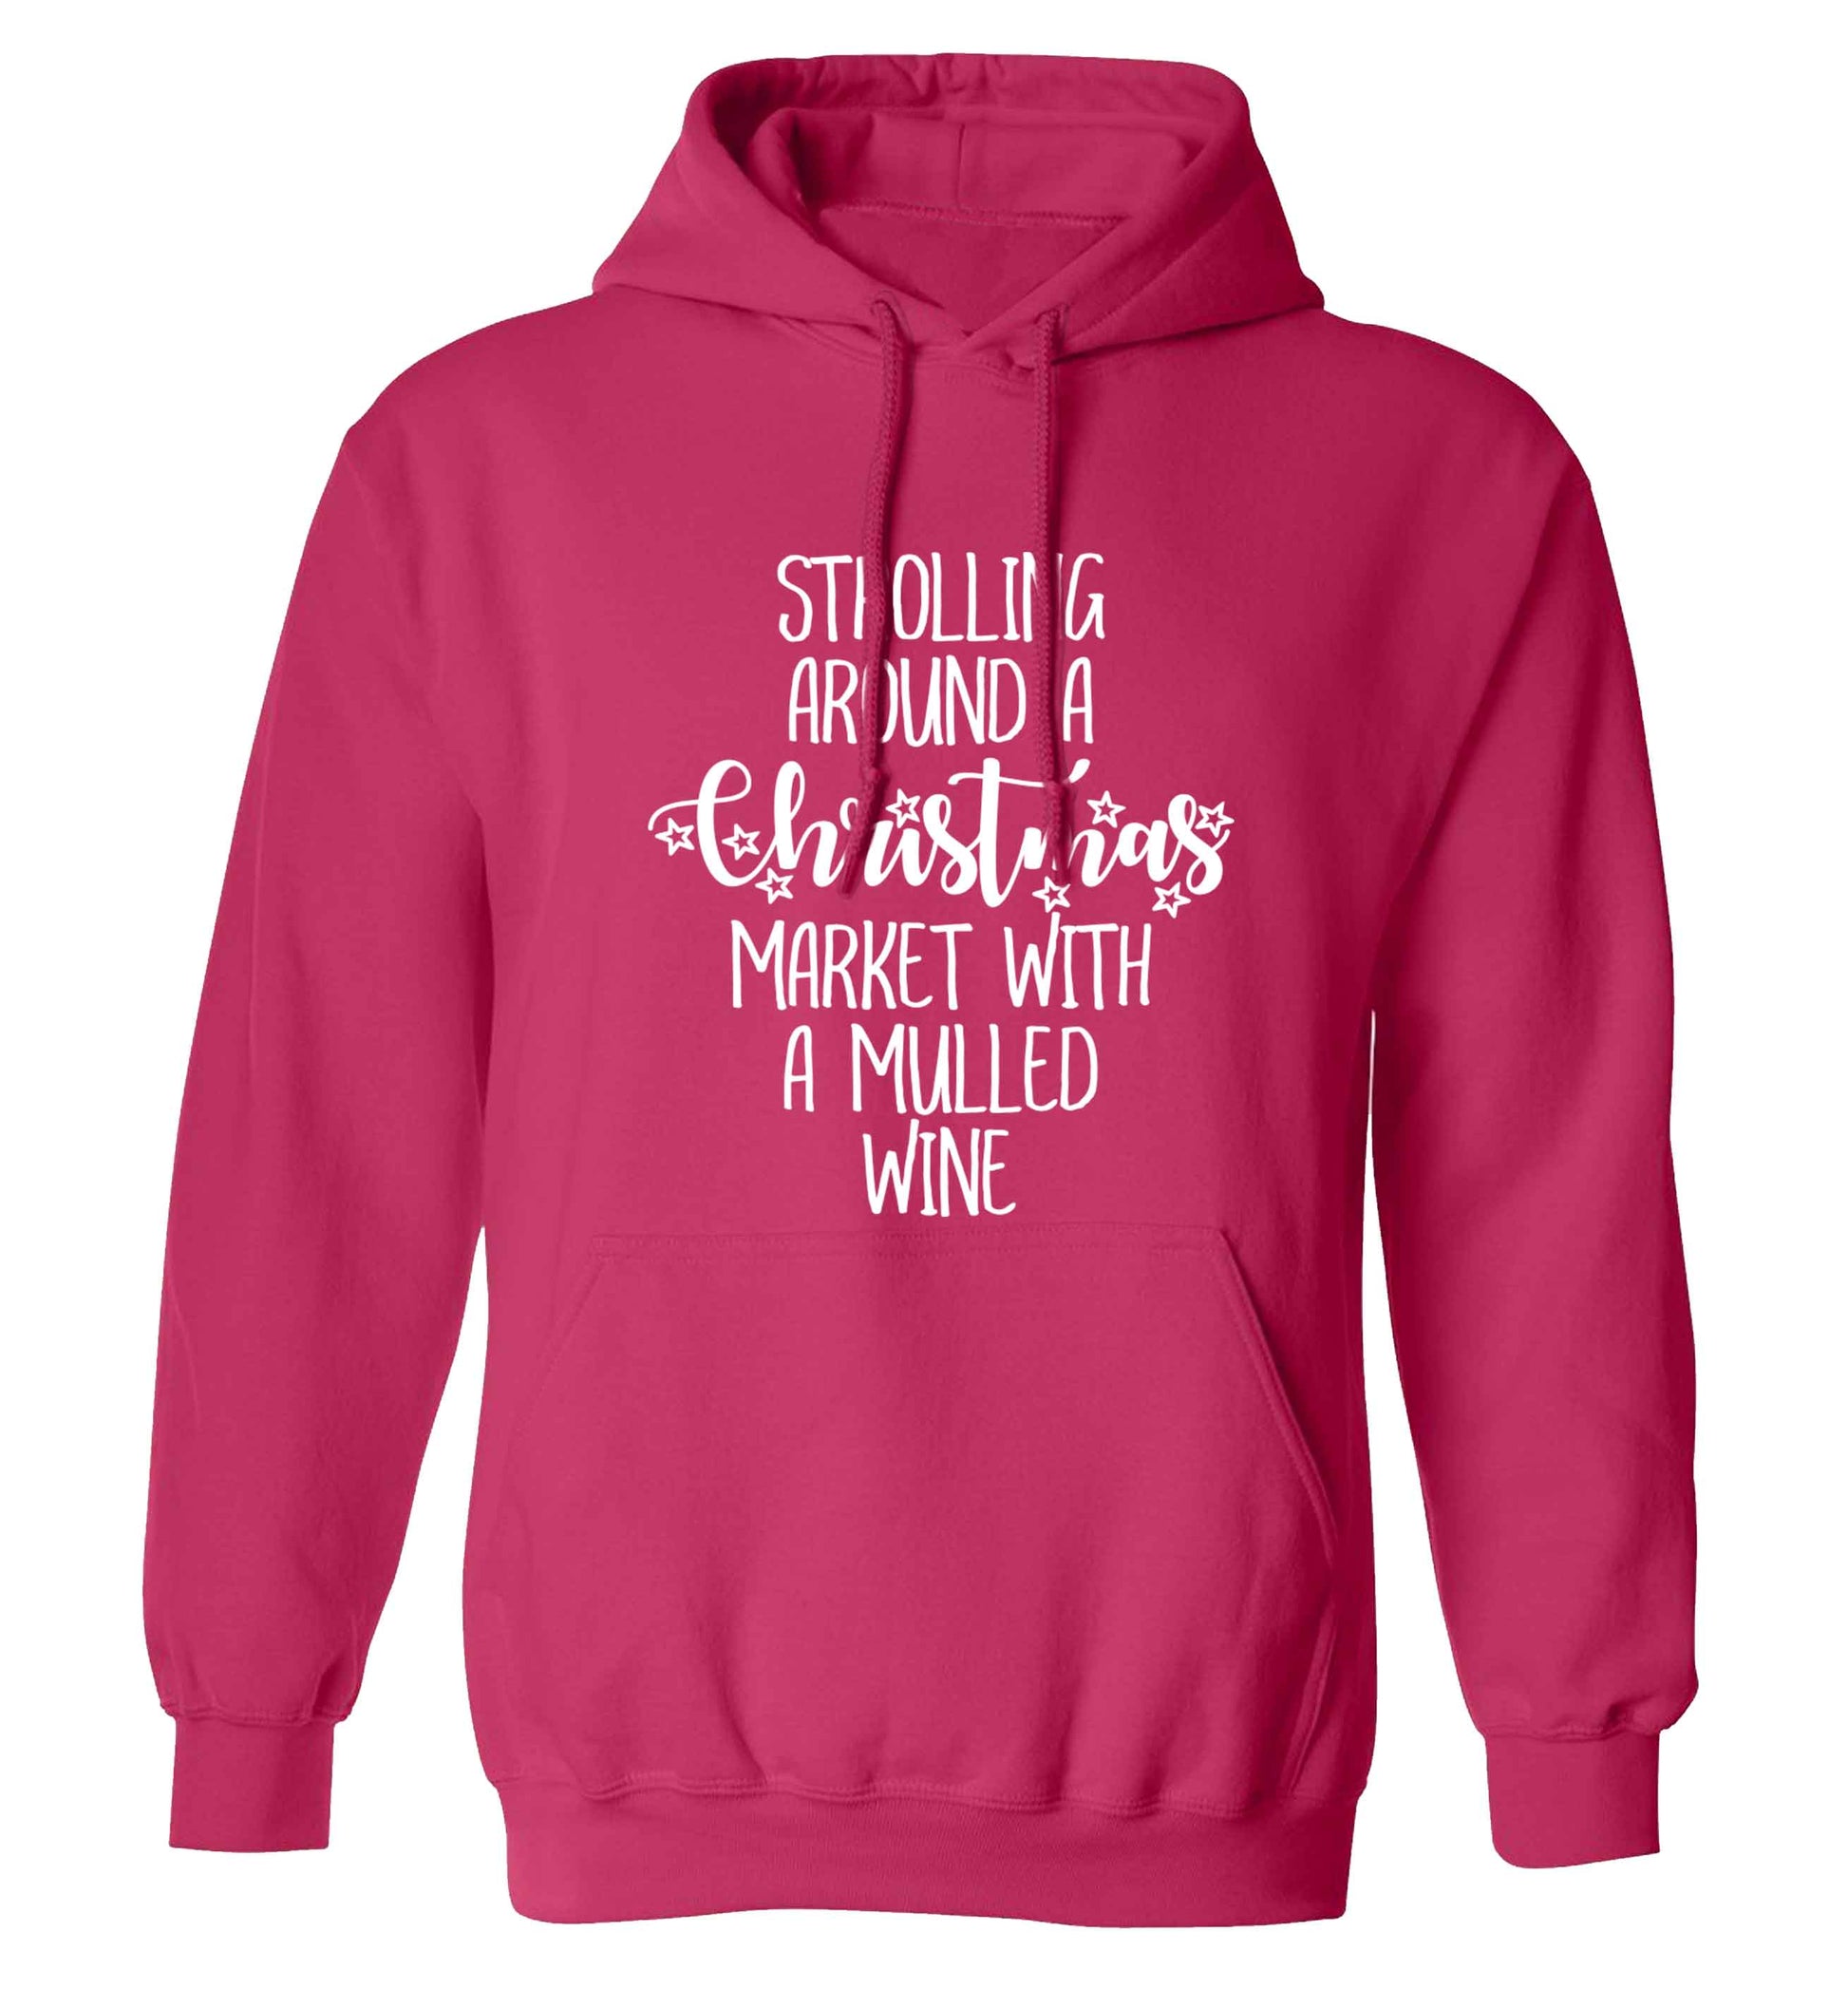 Strolling around a Christmas market with mulled wine adults unisex pink hoodie 2XL